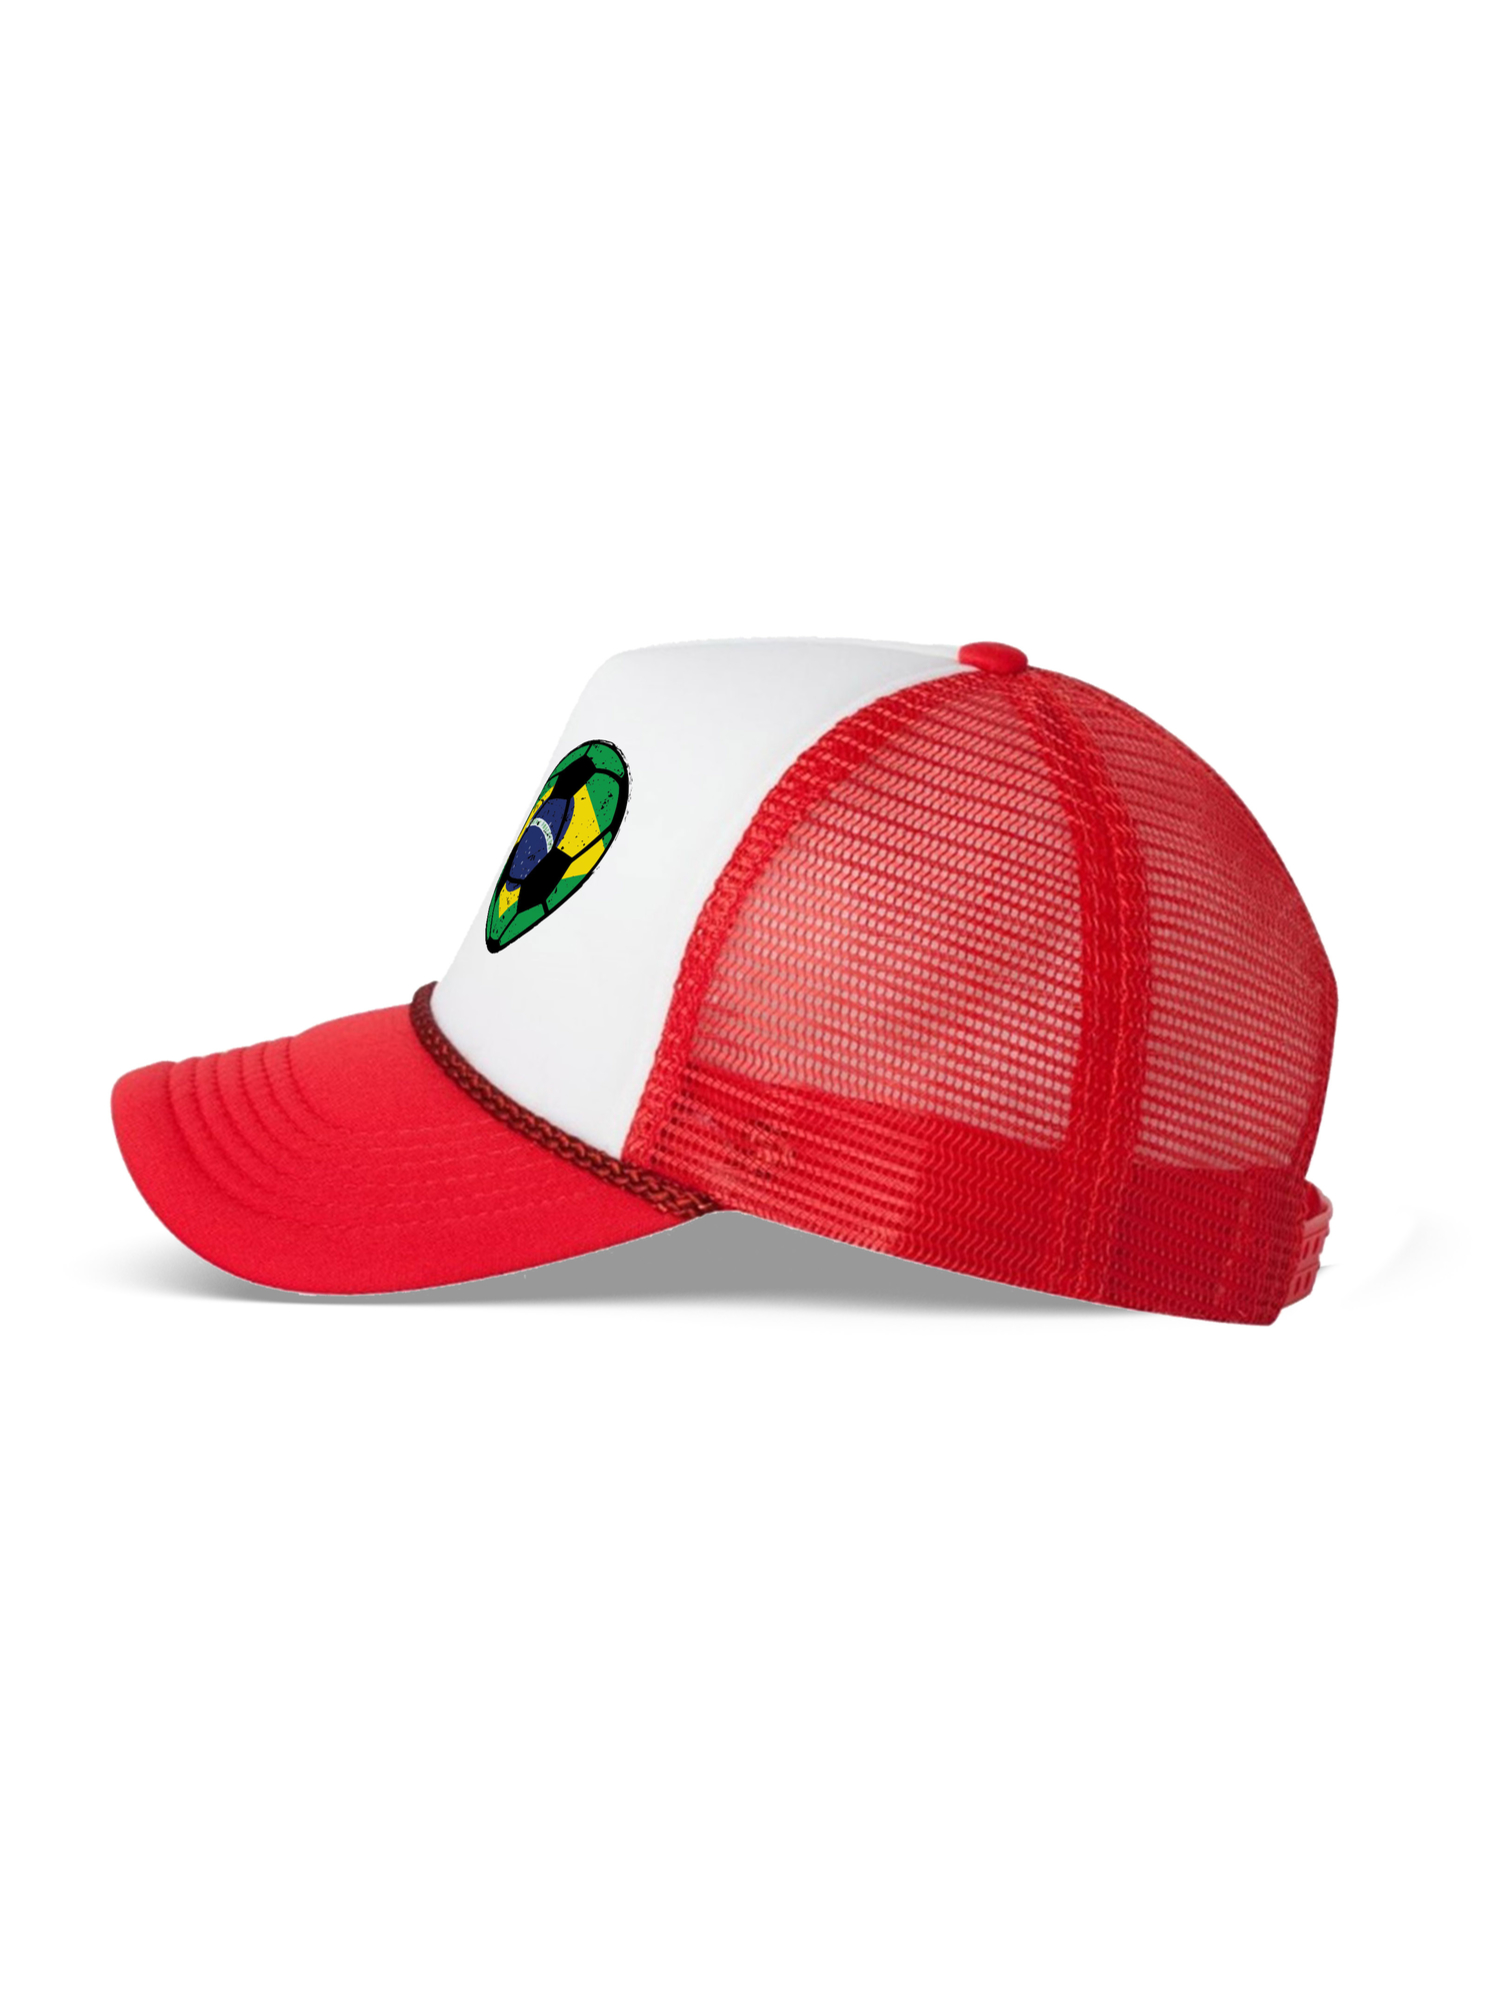 Awkward Styles Brazil Soccer Ball Hat Brazilian Soccer Trucker Hat Brazil 2018 Baseball Cap Brazil Trucker Hats for Men and Women Hat Gifts from Brazil Brazilian Baseball Hats Brazilian Flag Hat - image 3 of 6